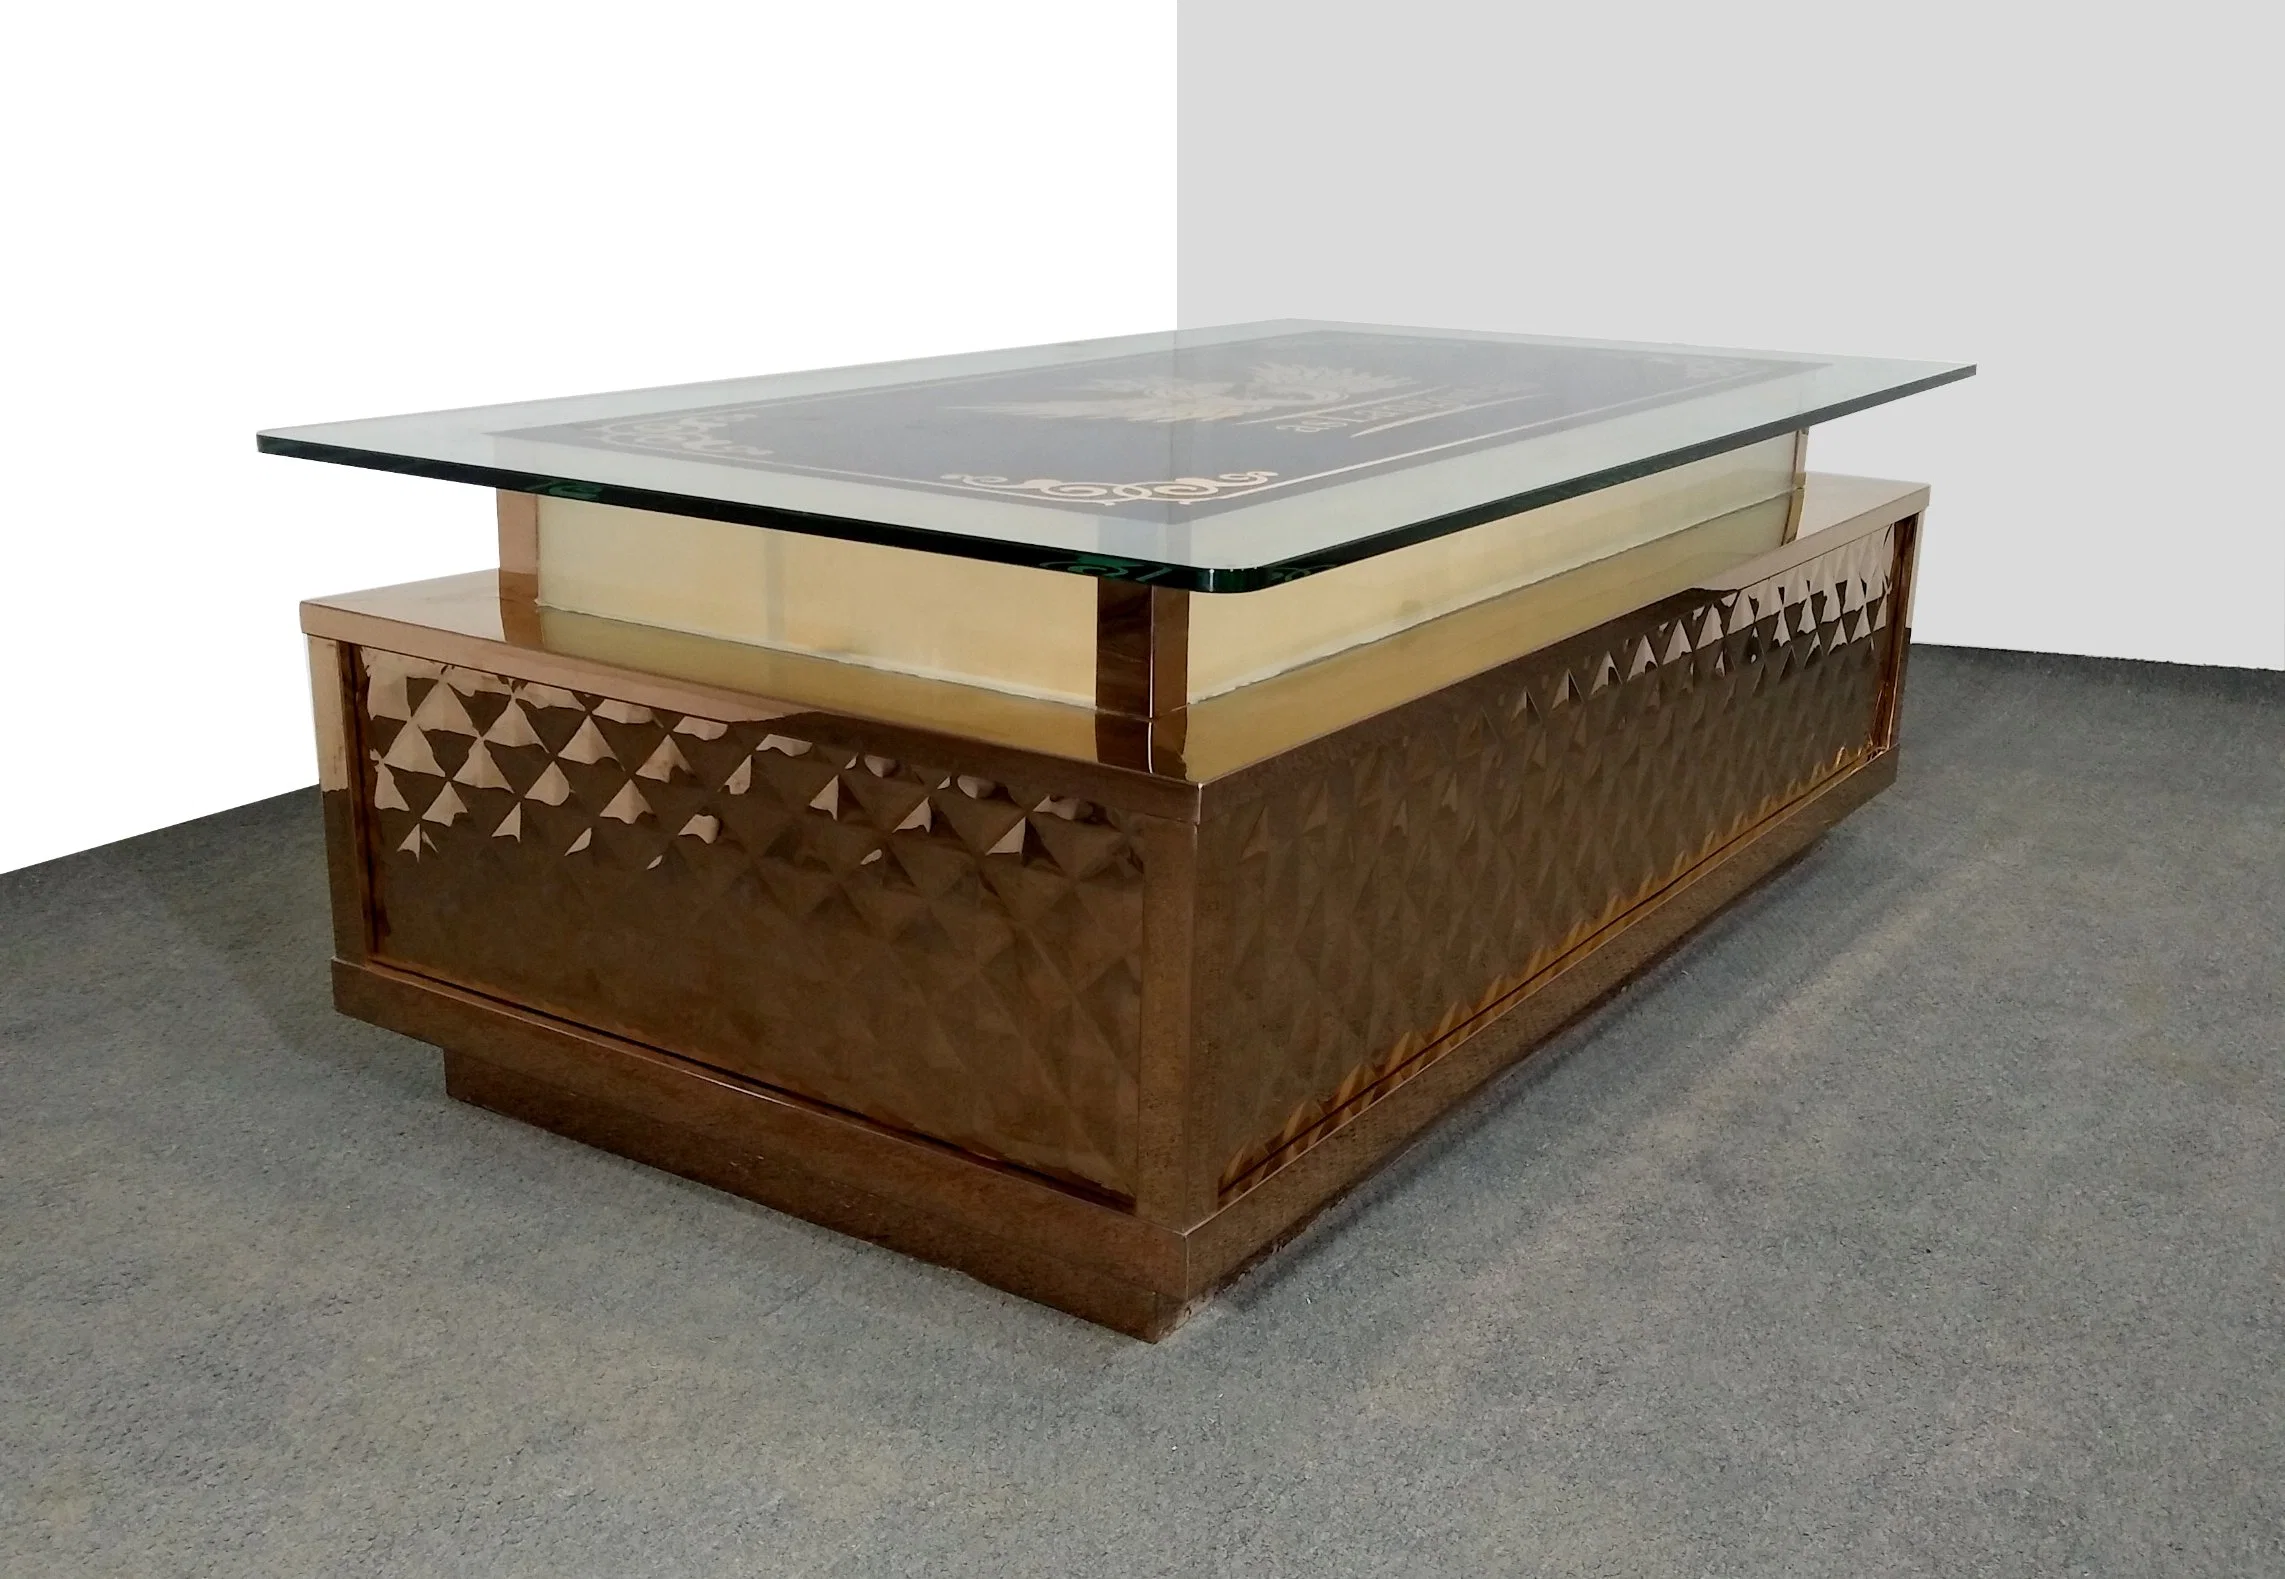 Exclusive Night Club Furniture with High-End Decor KTV Glass Coffee Table